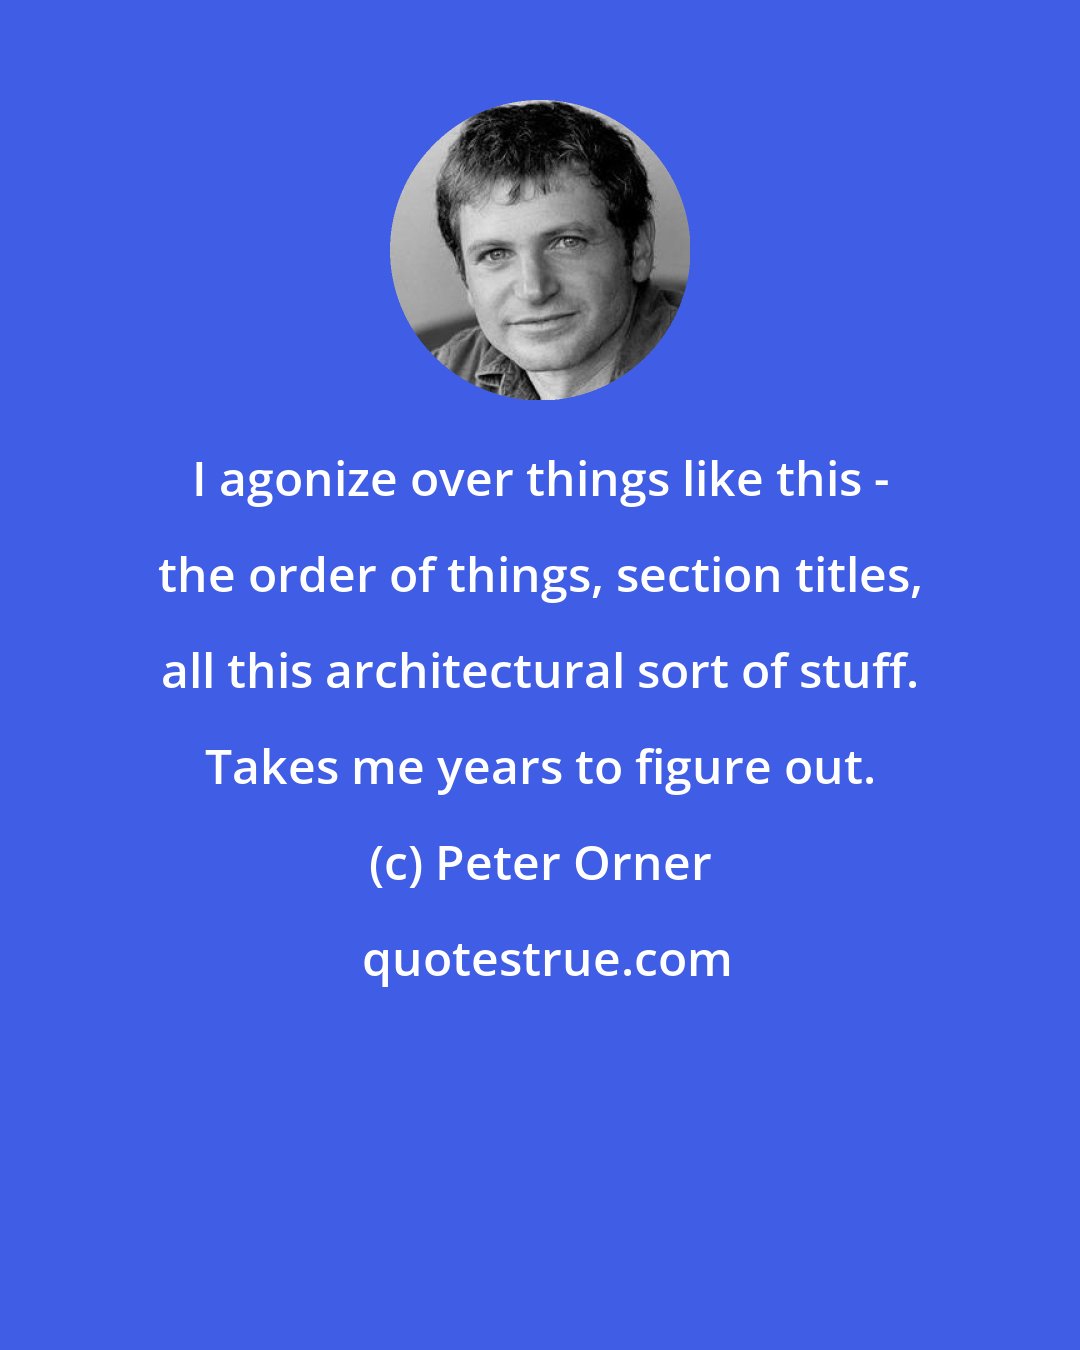 Peter Orner: I agonize over things like this - the order of things, section titles, all this architectural sort of stuff. Takes me years to figure out.